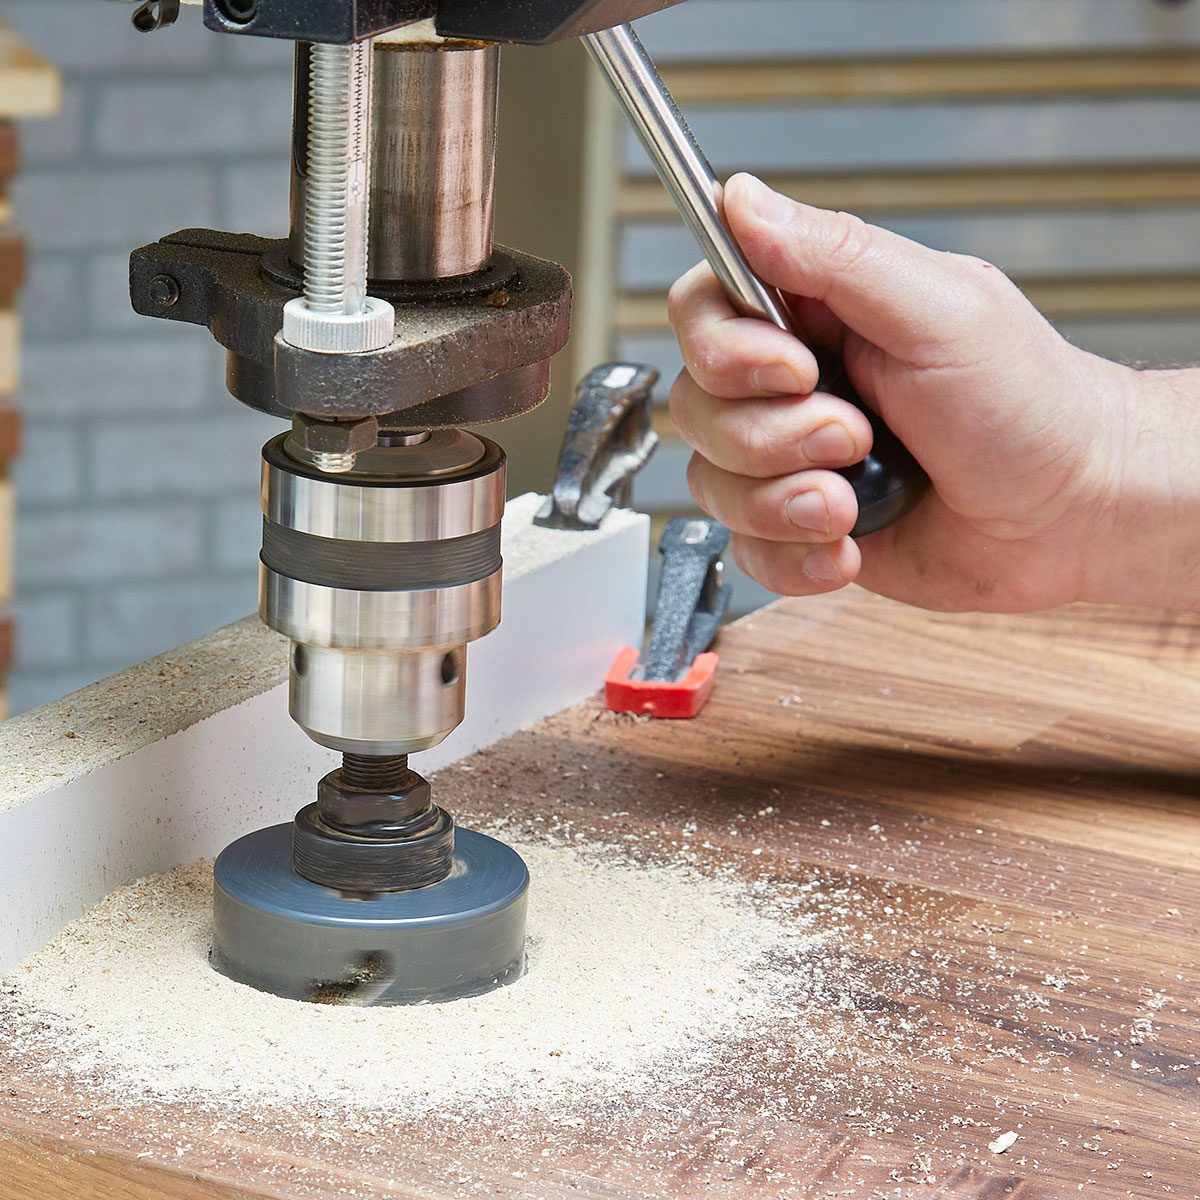 Drill press cutting into wood | Construction Pro Tips